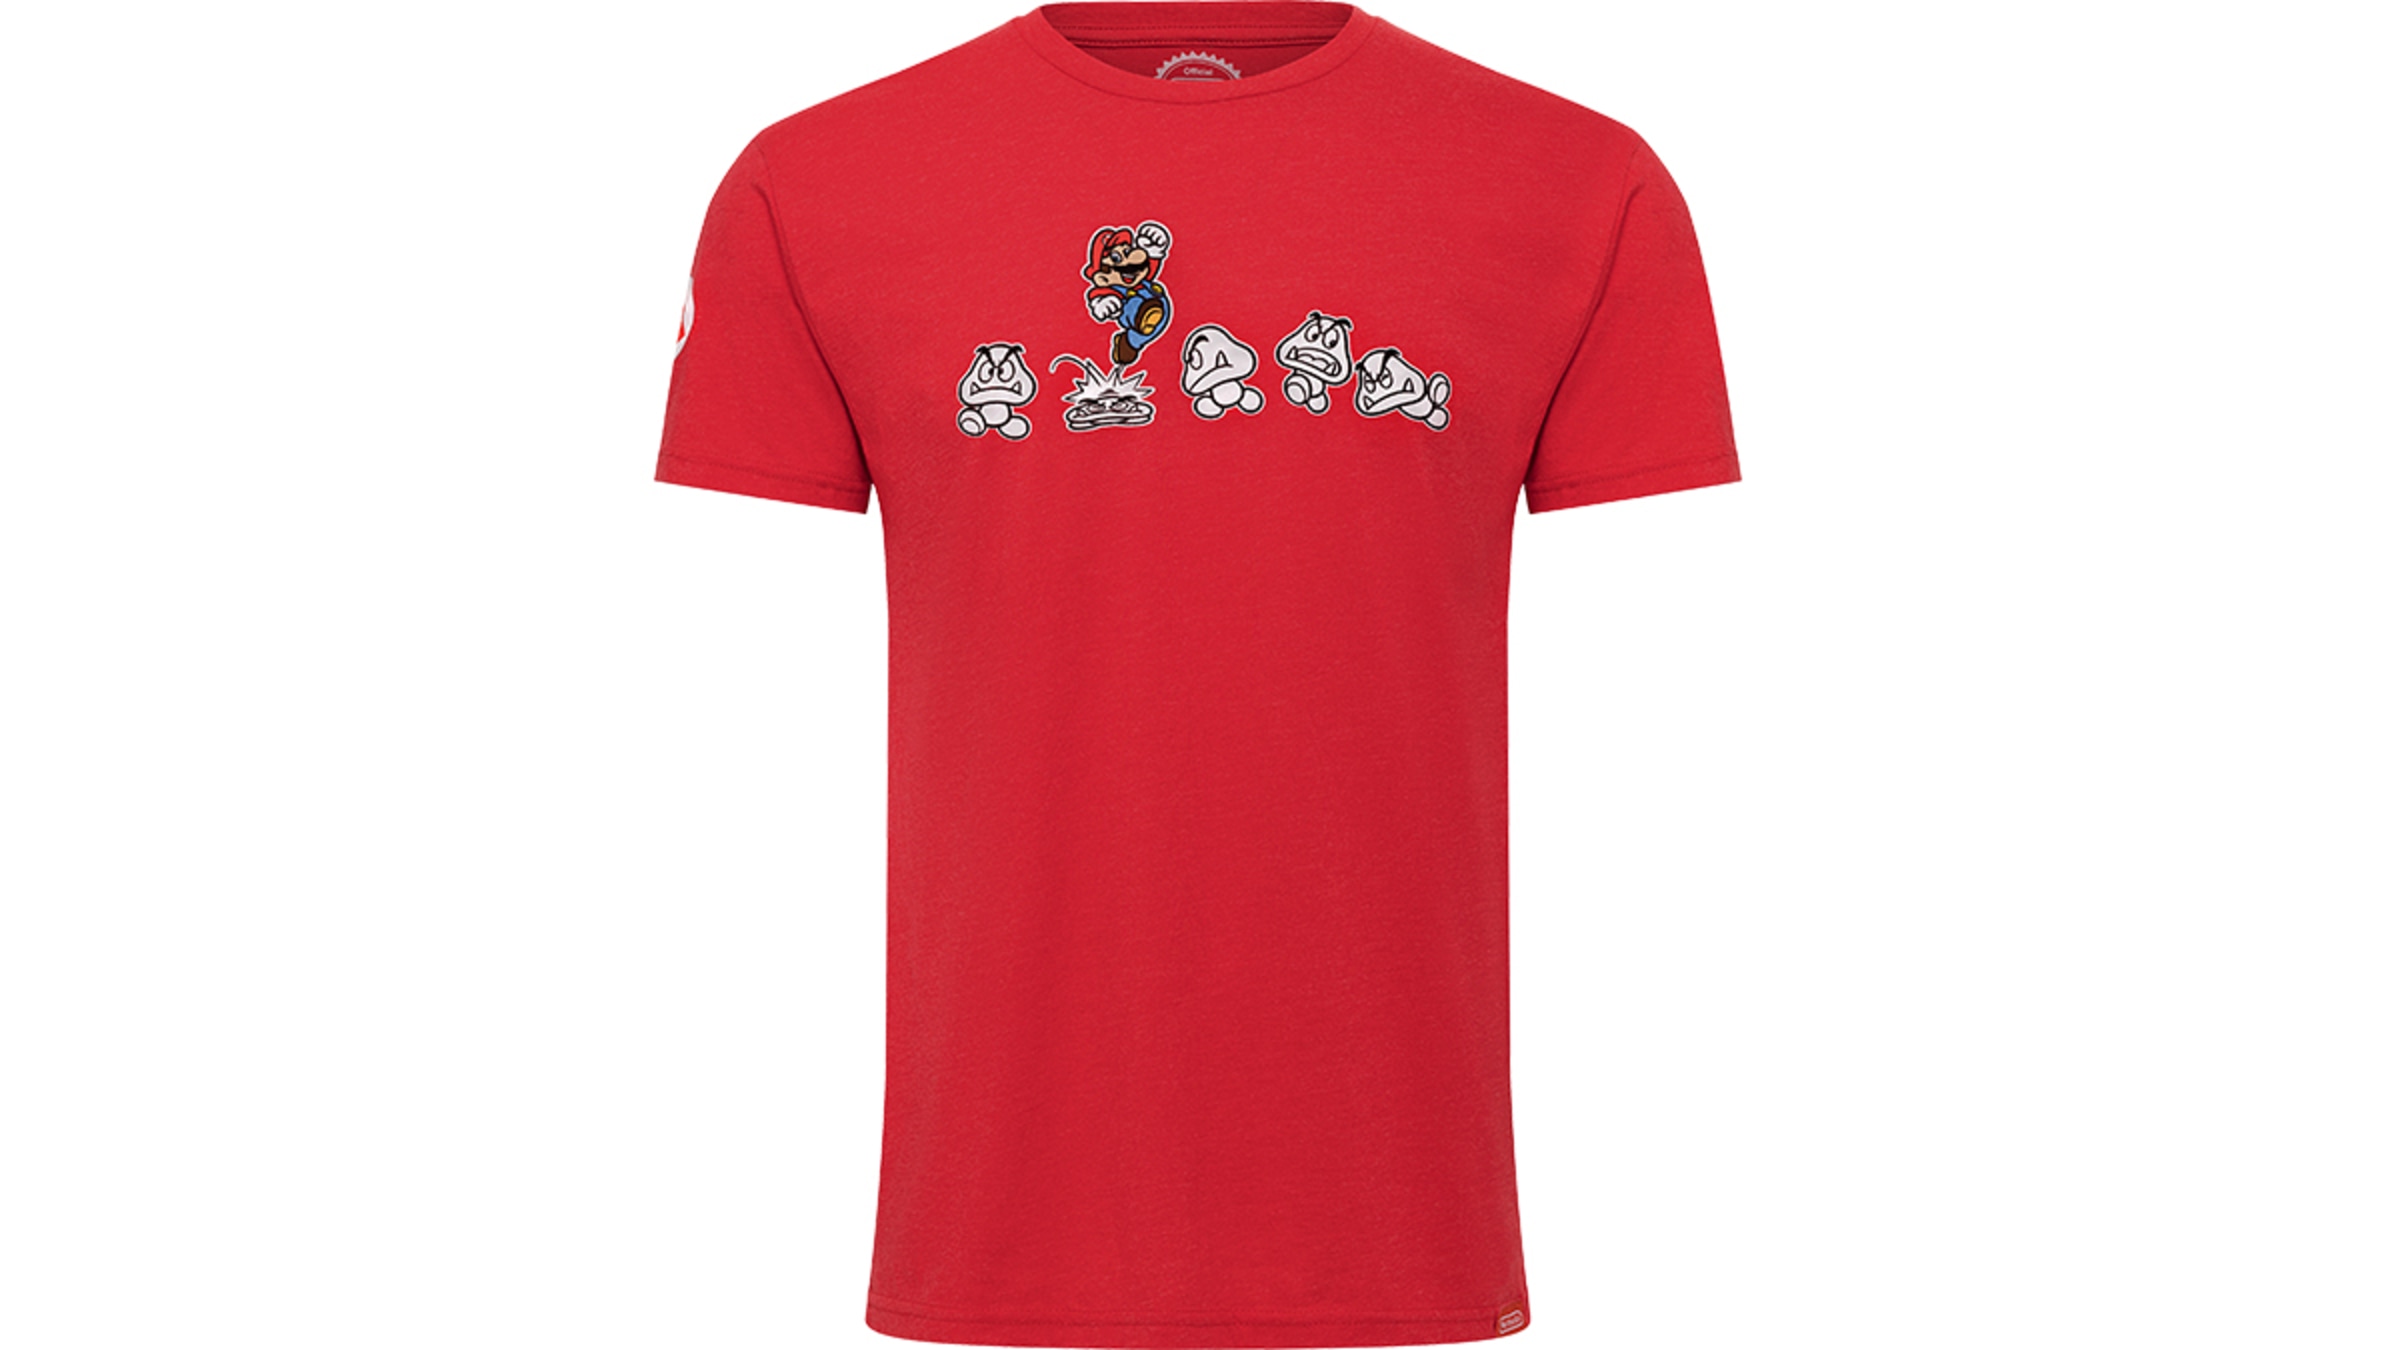 Super Mario and Goombas T-shirt Heather Red - Nintendo Official Site